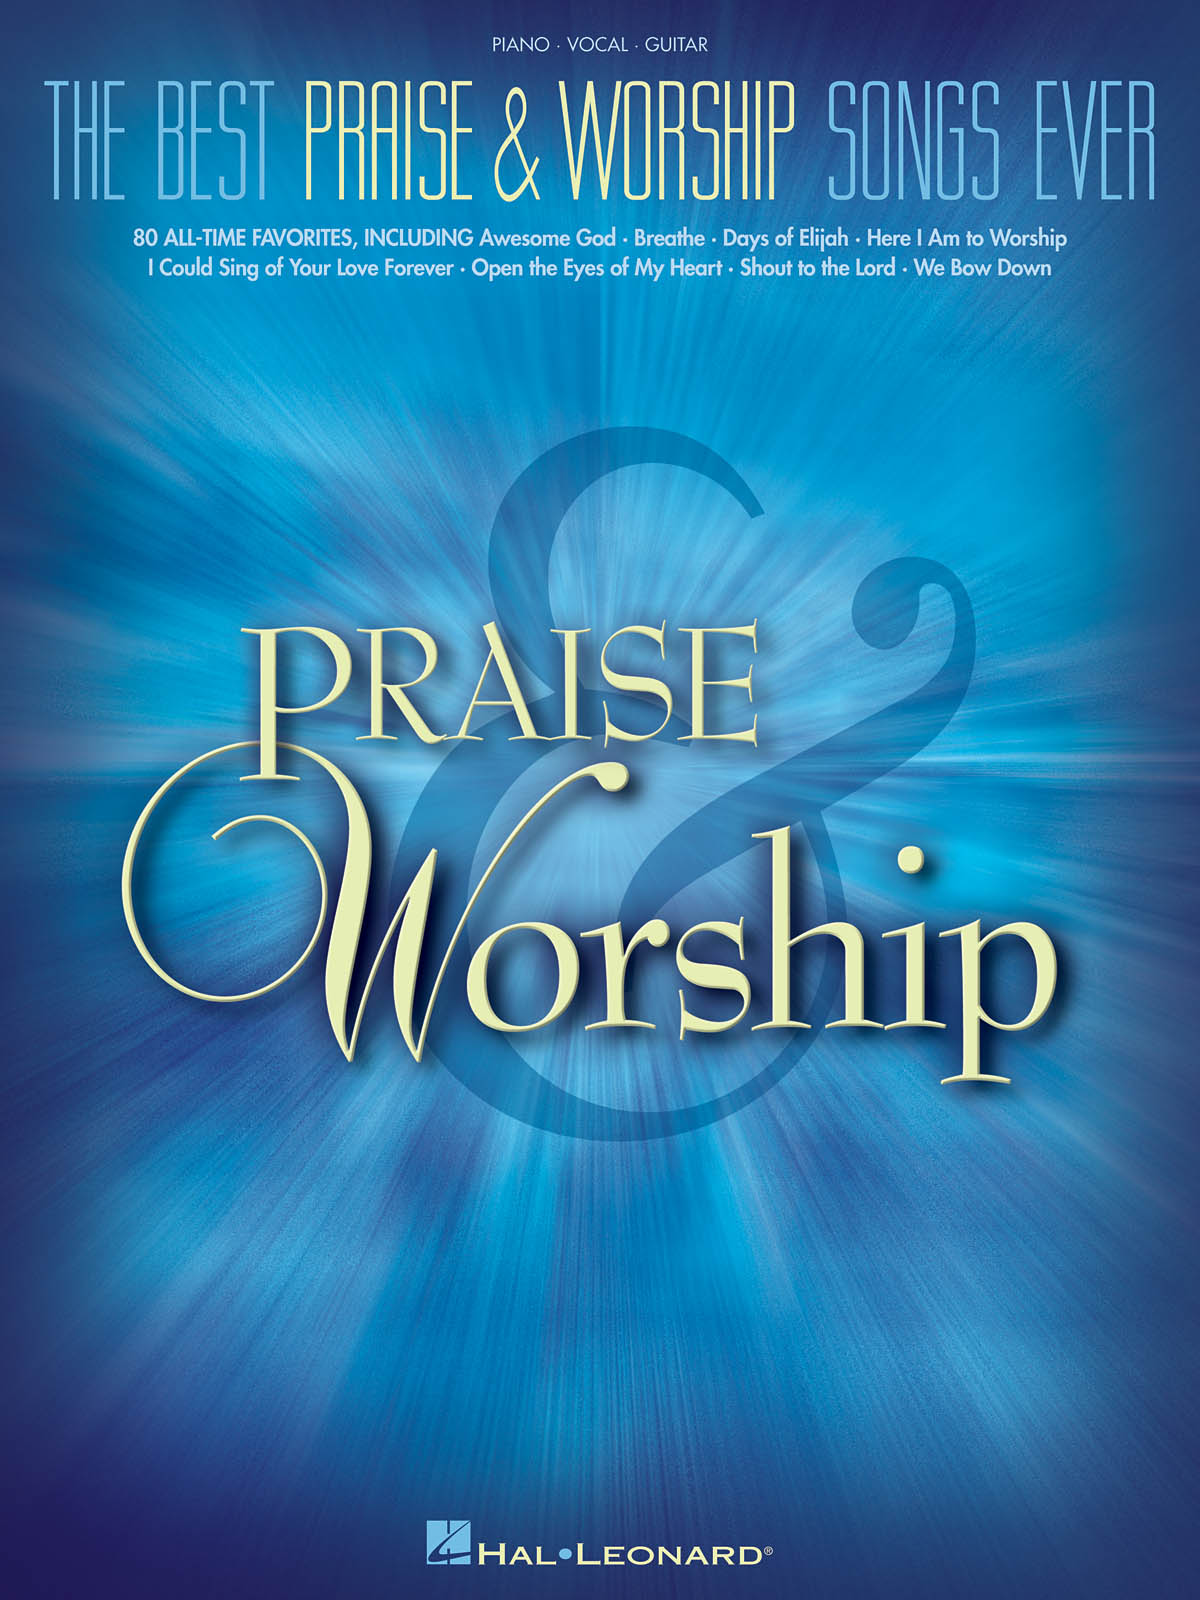 The Best Praise and Worship Songs Ever